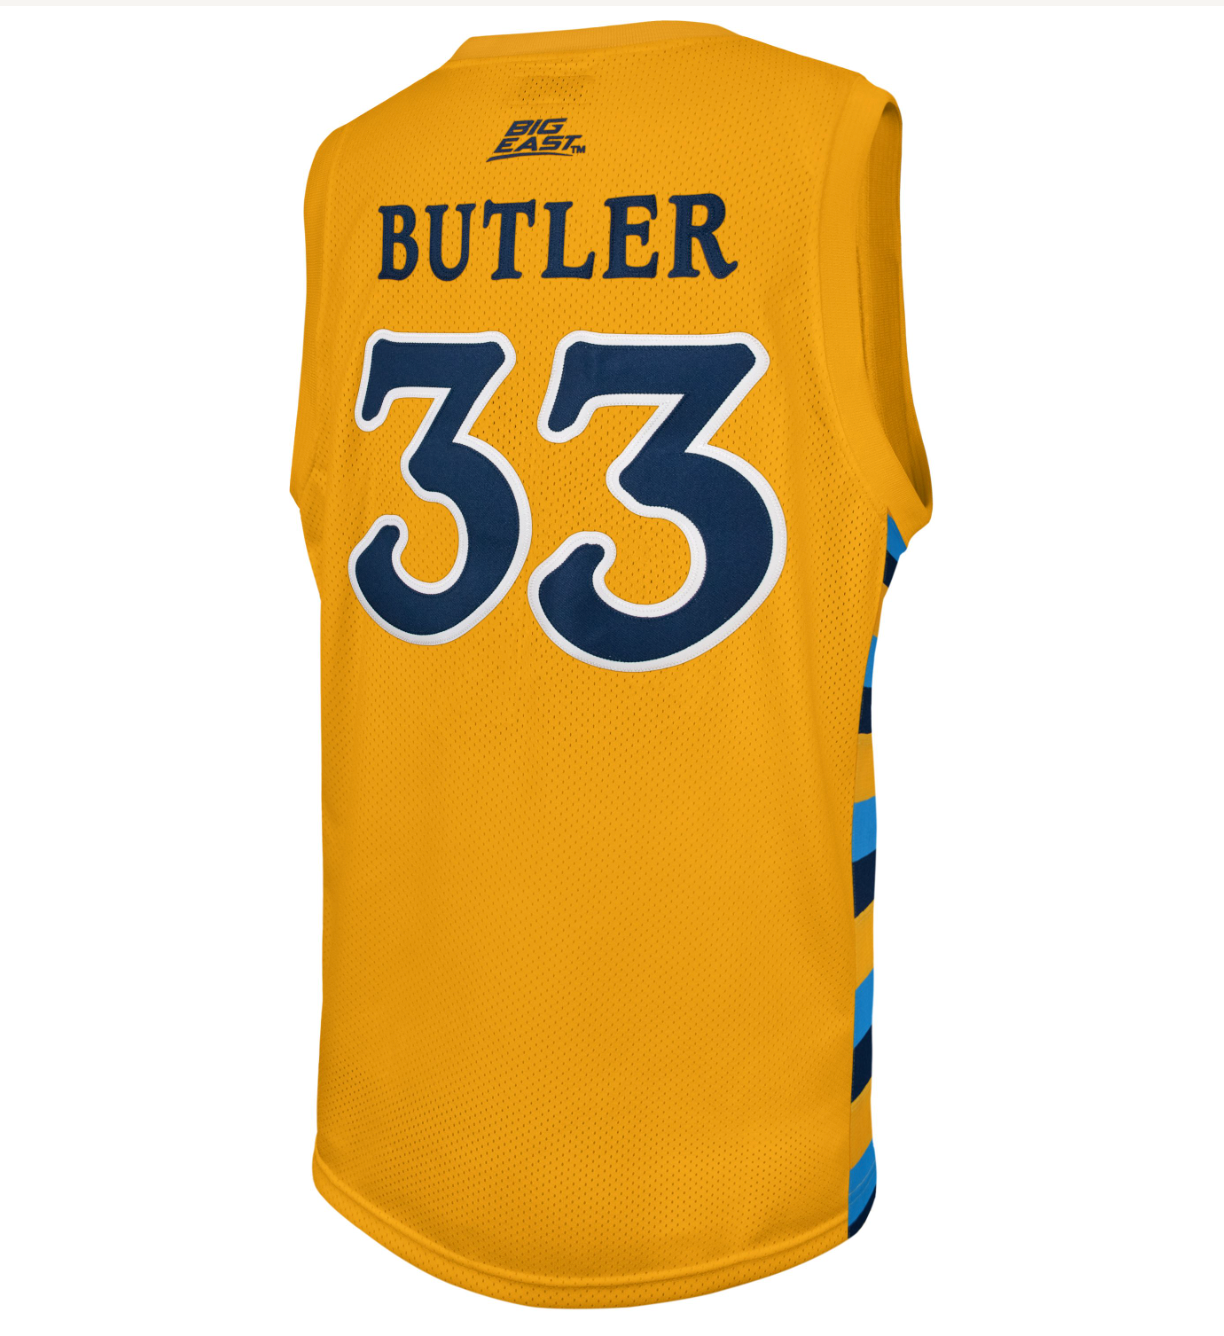 Marquette Golden Eagles Jimmy Butler Throwback Jersey